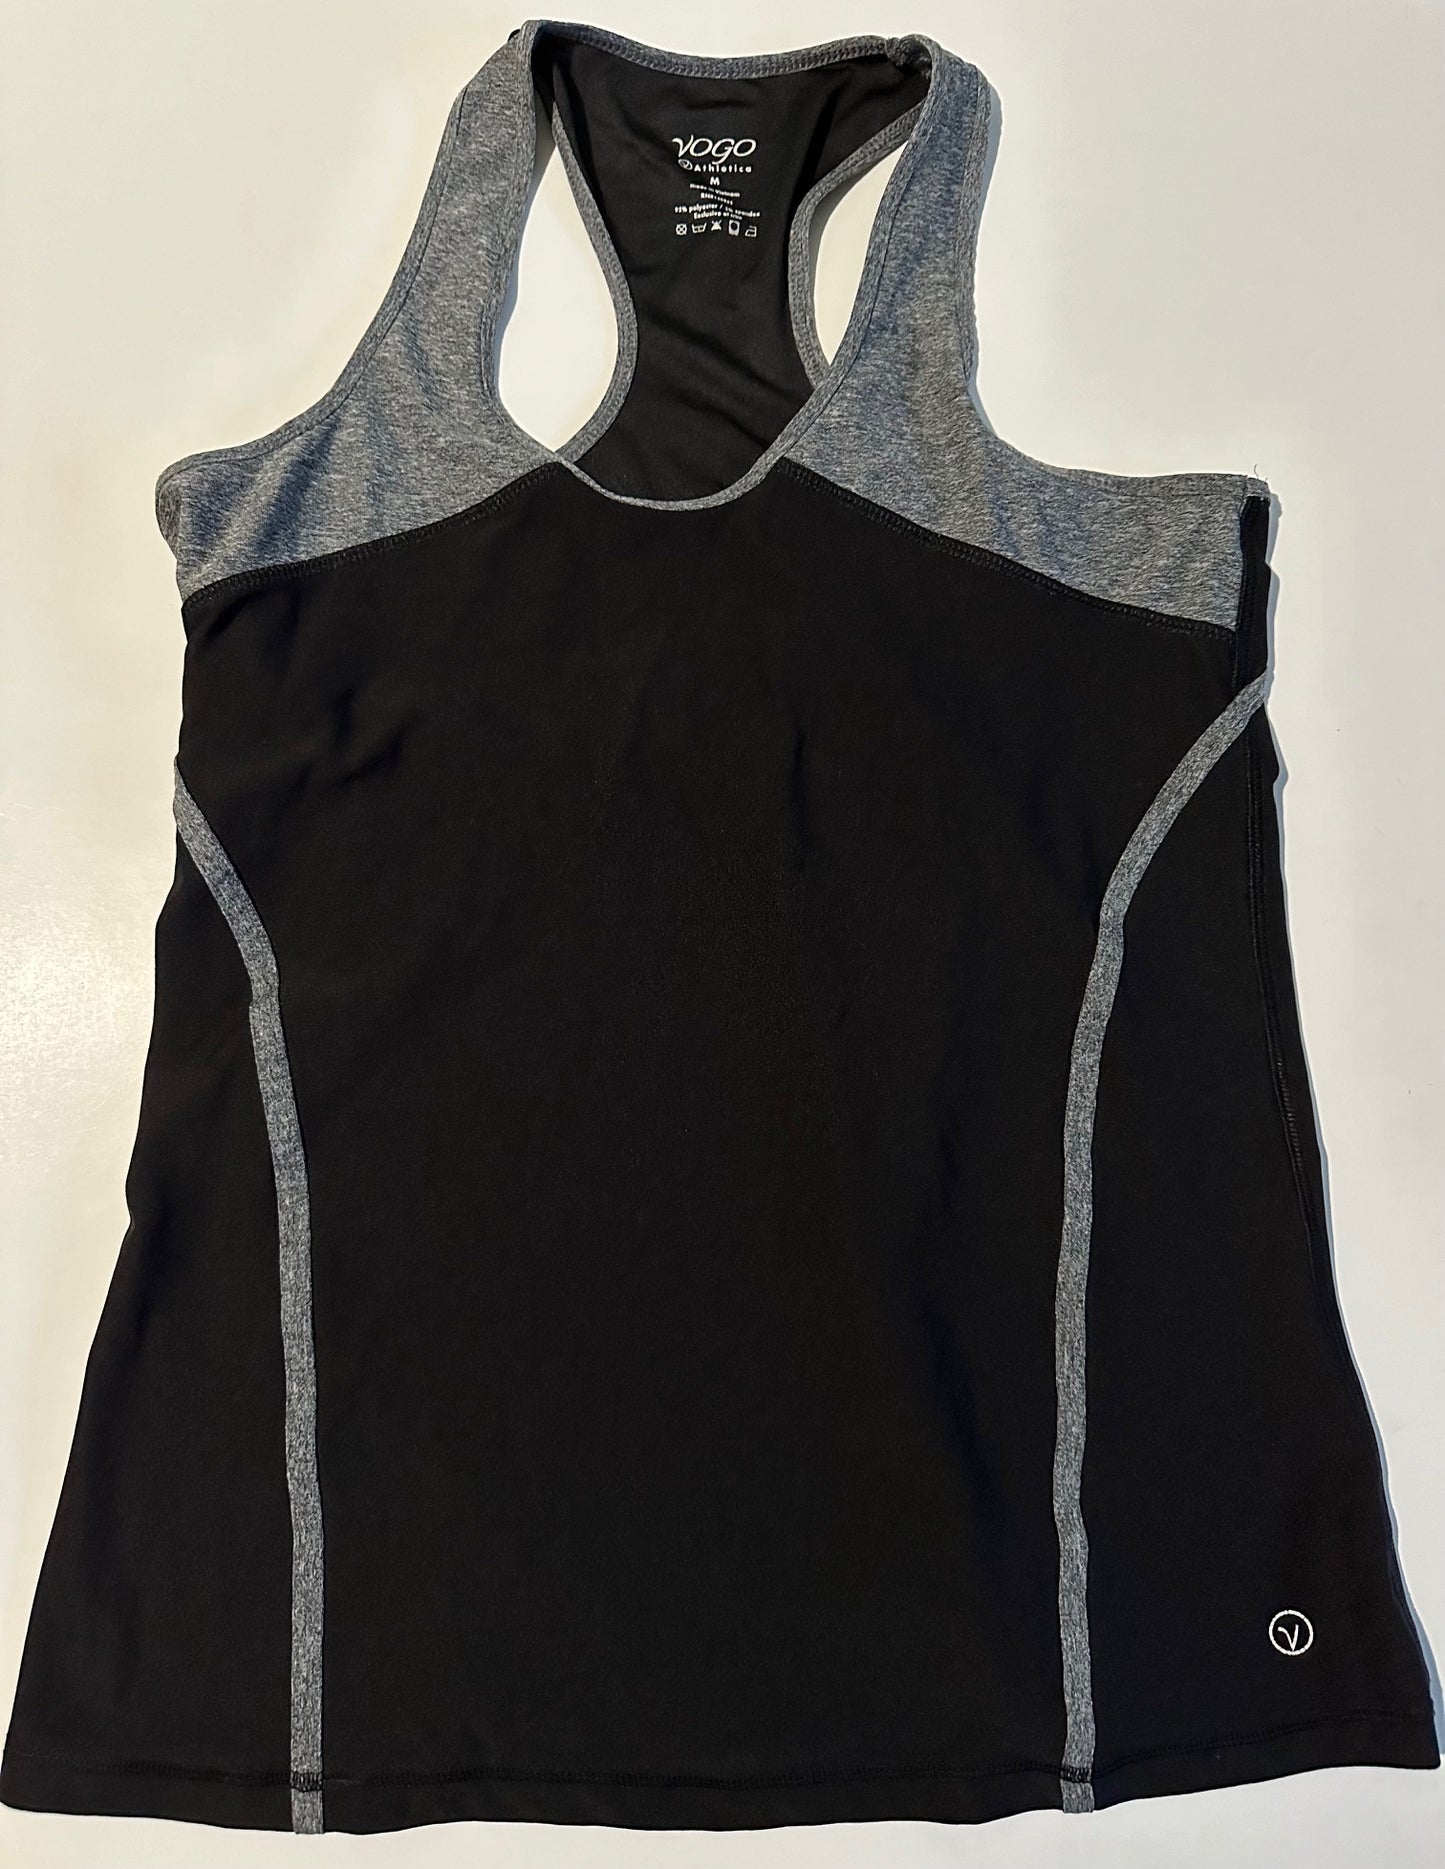 Adult* Vogo Athletics, Black and Grey Workout Tank Top - Size